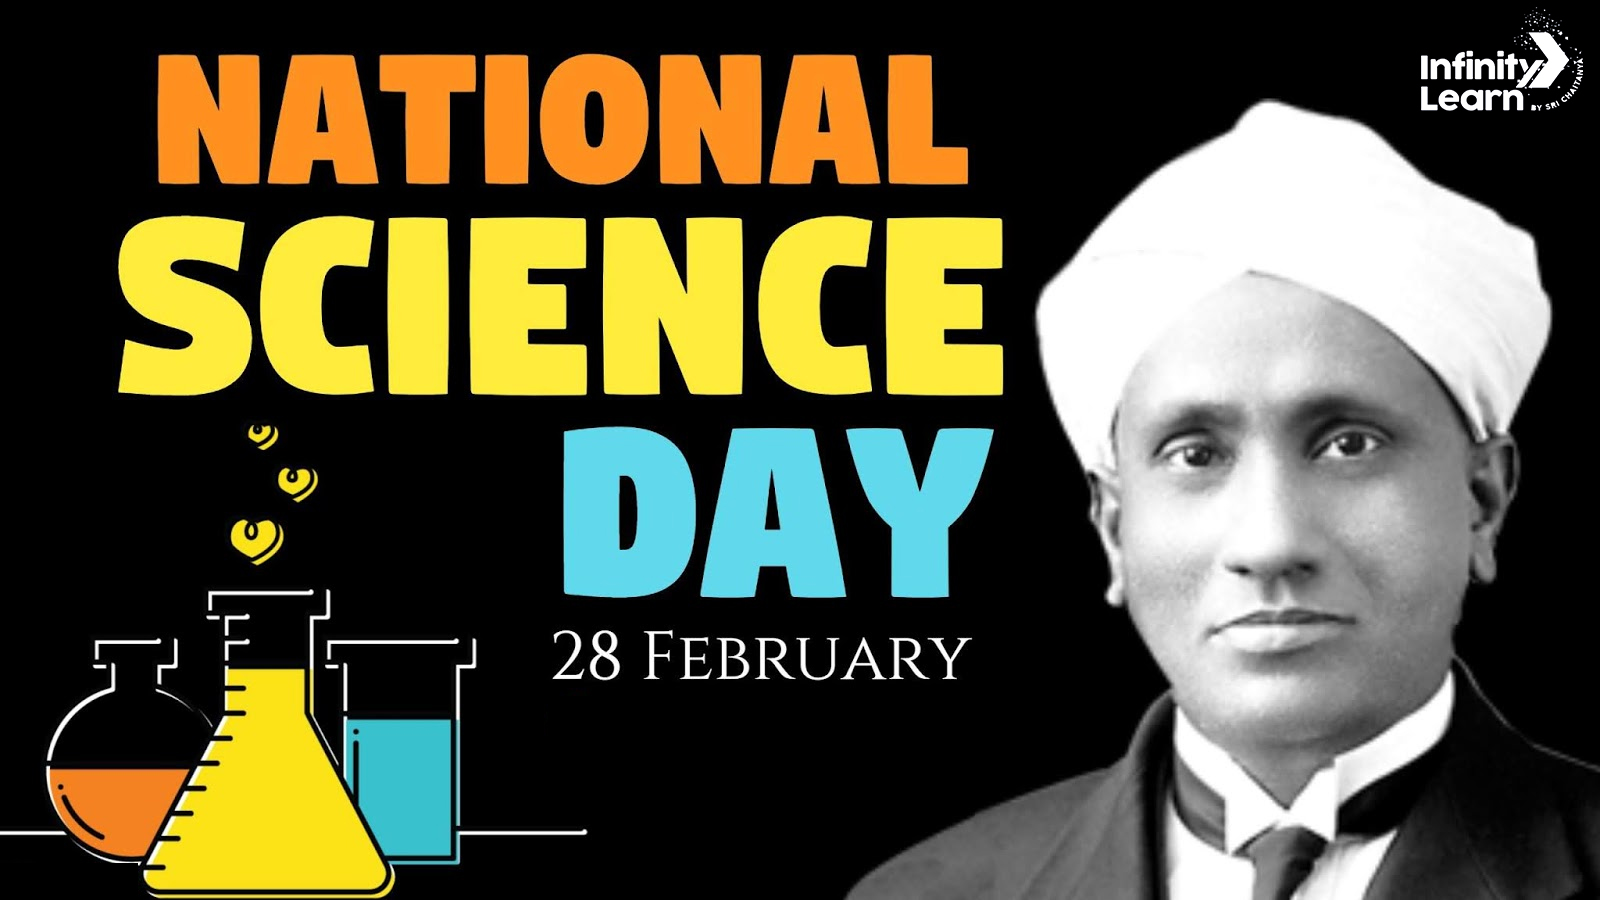 National Science Day 28 February 